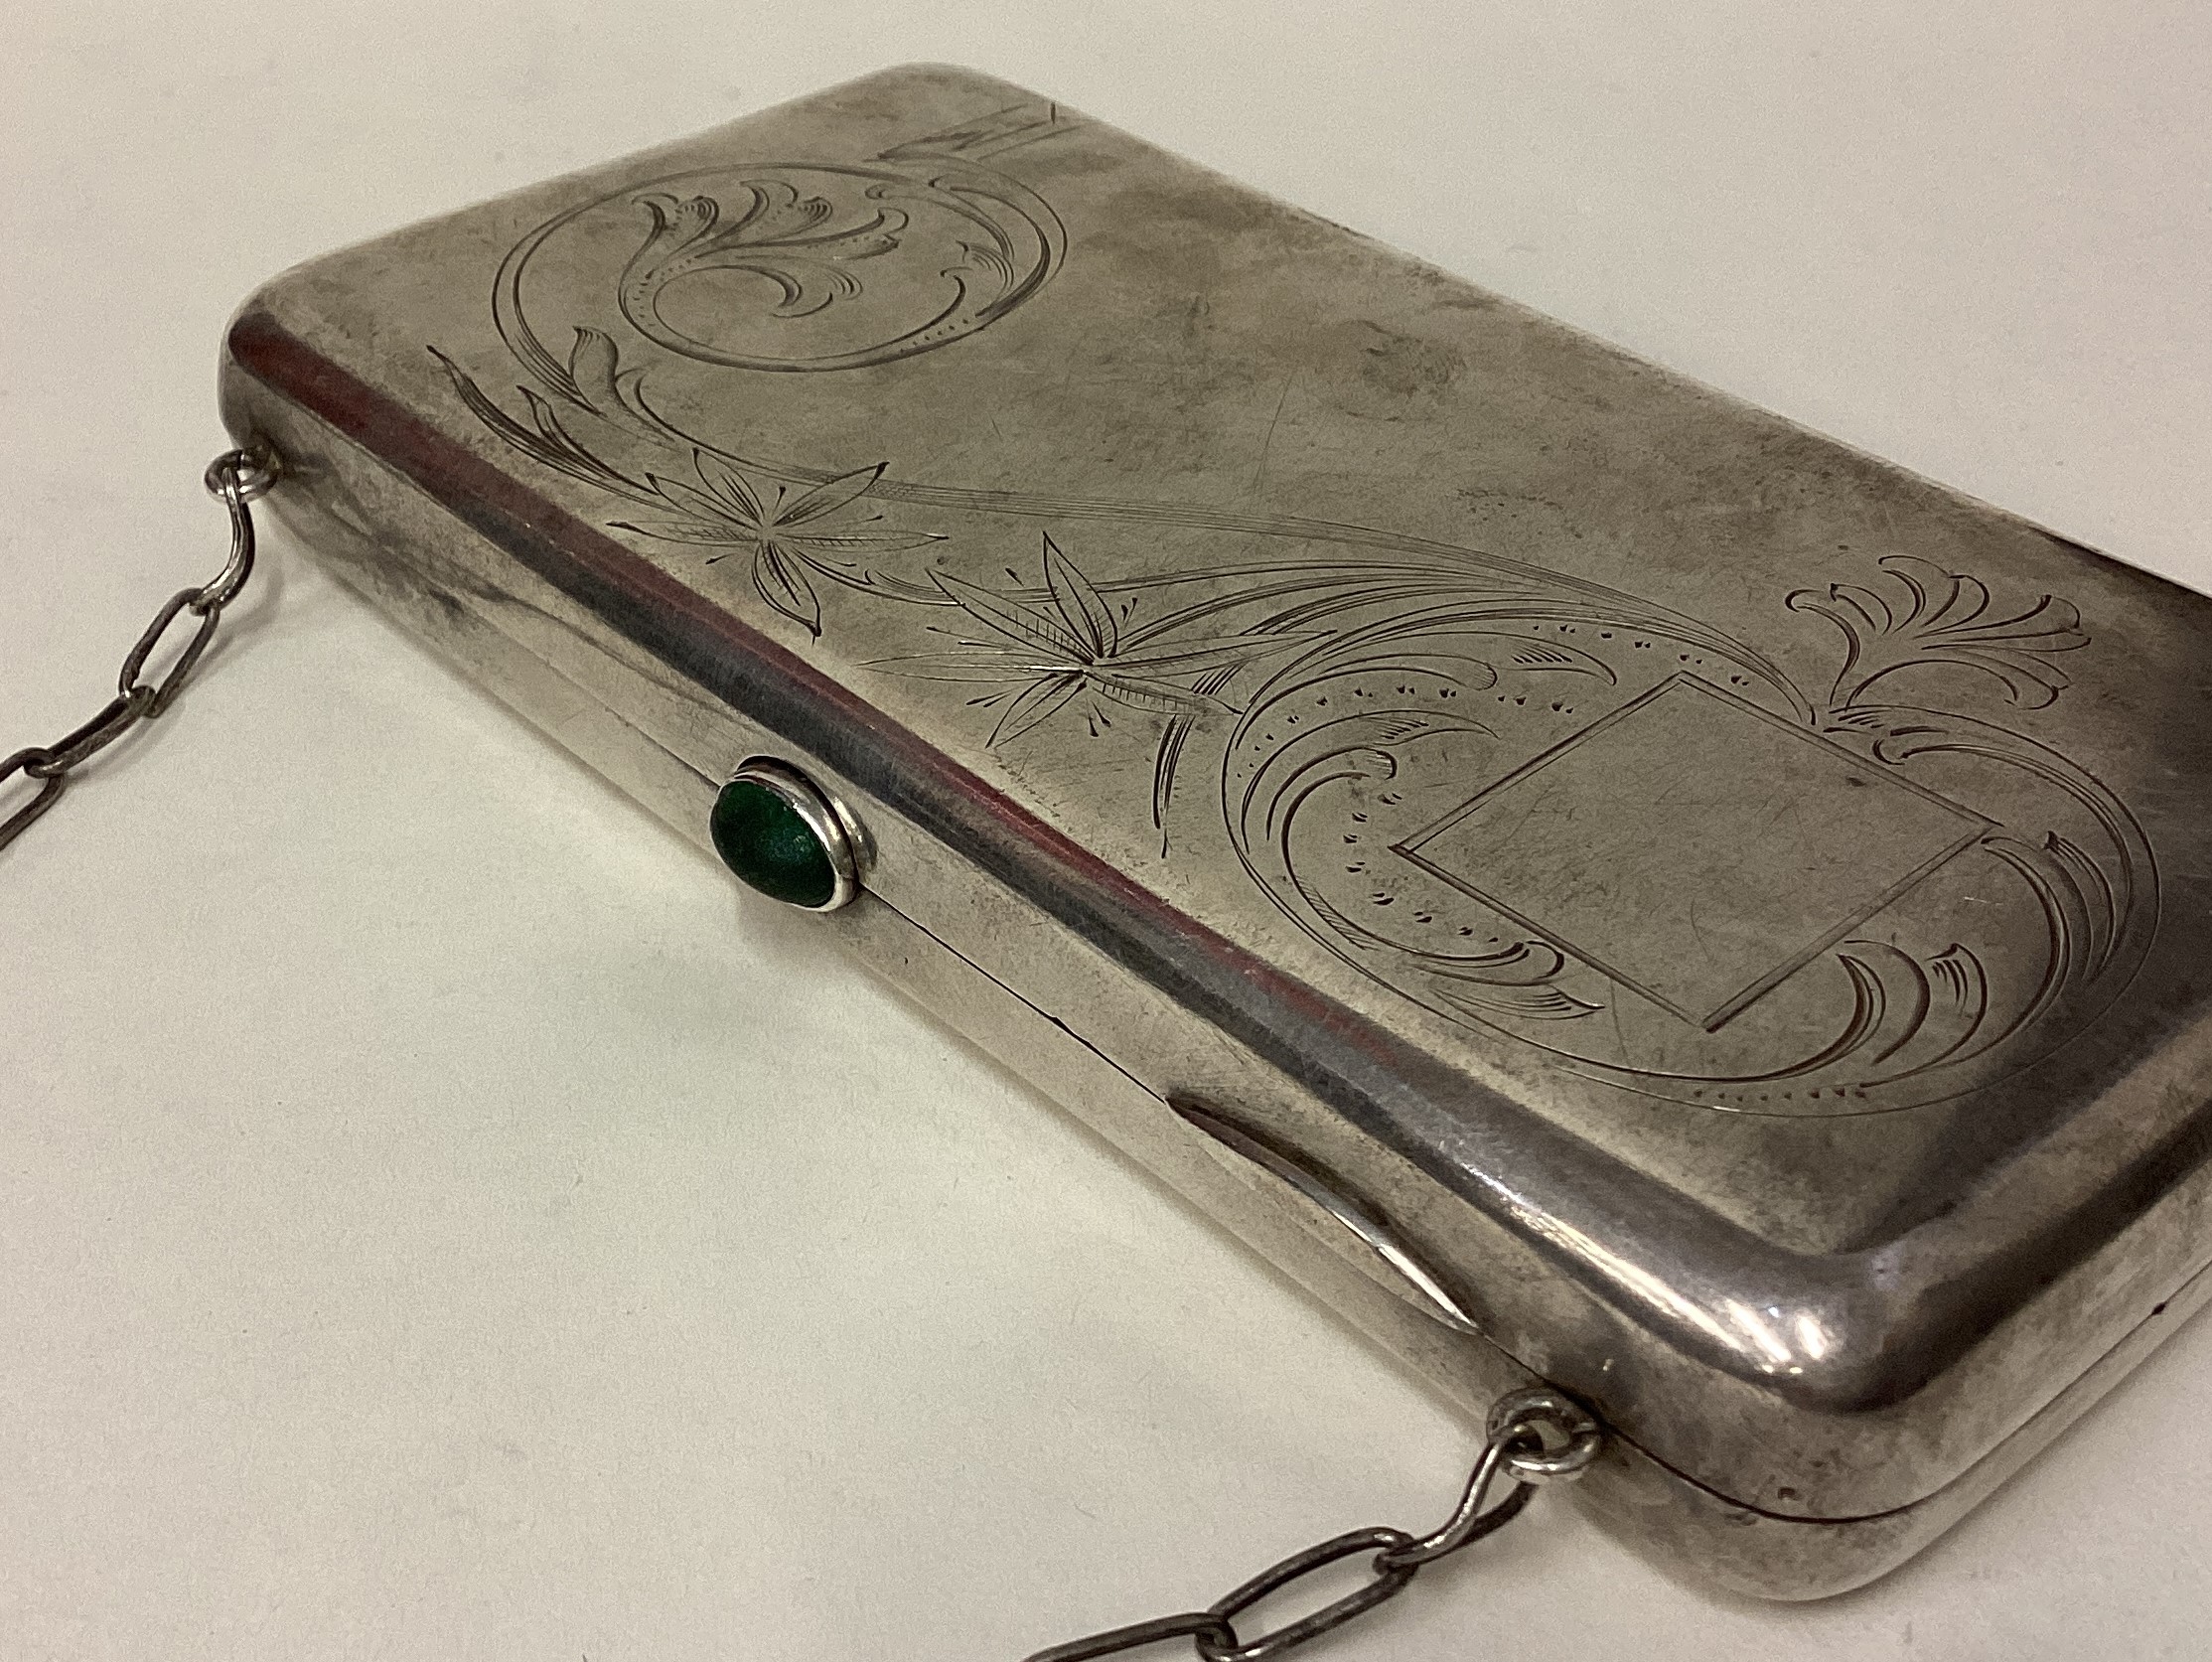 A large Russian silver purse with green stone and engraved decoration. - Image 2 of 3